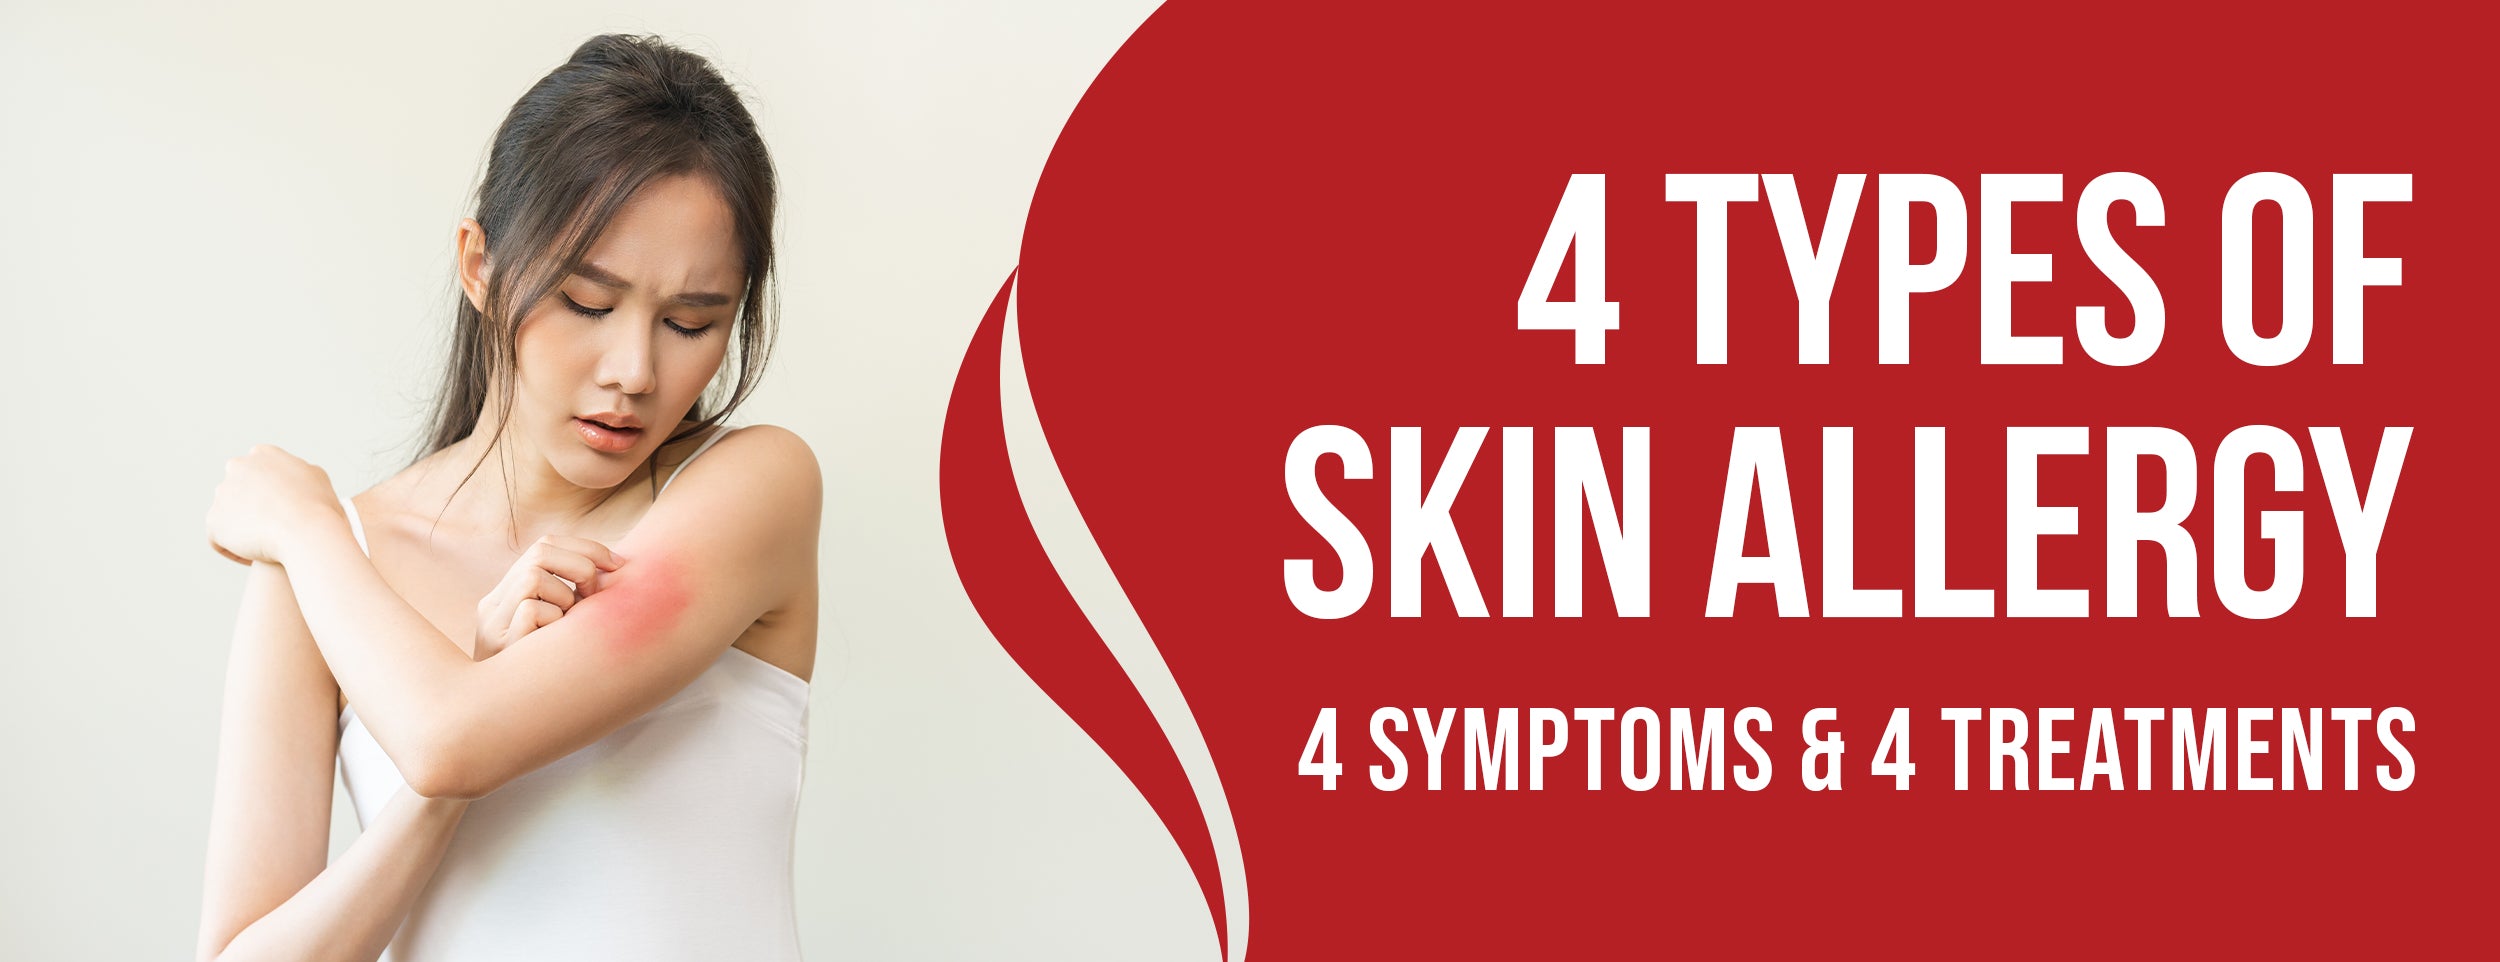 4 Types of Skin Allergy: 4 Symptoms & 4 Treatments – Dr. Numb®